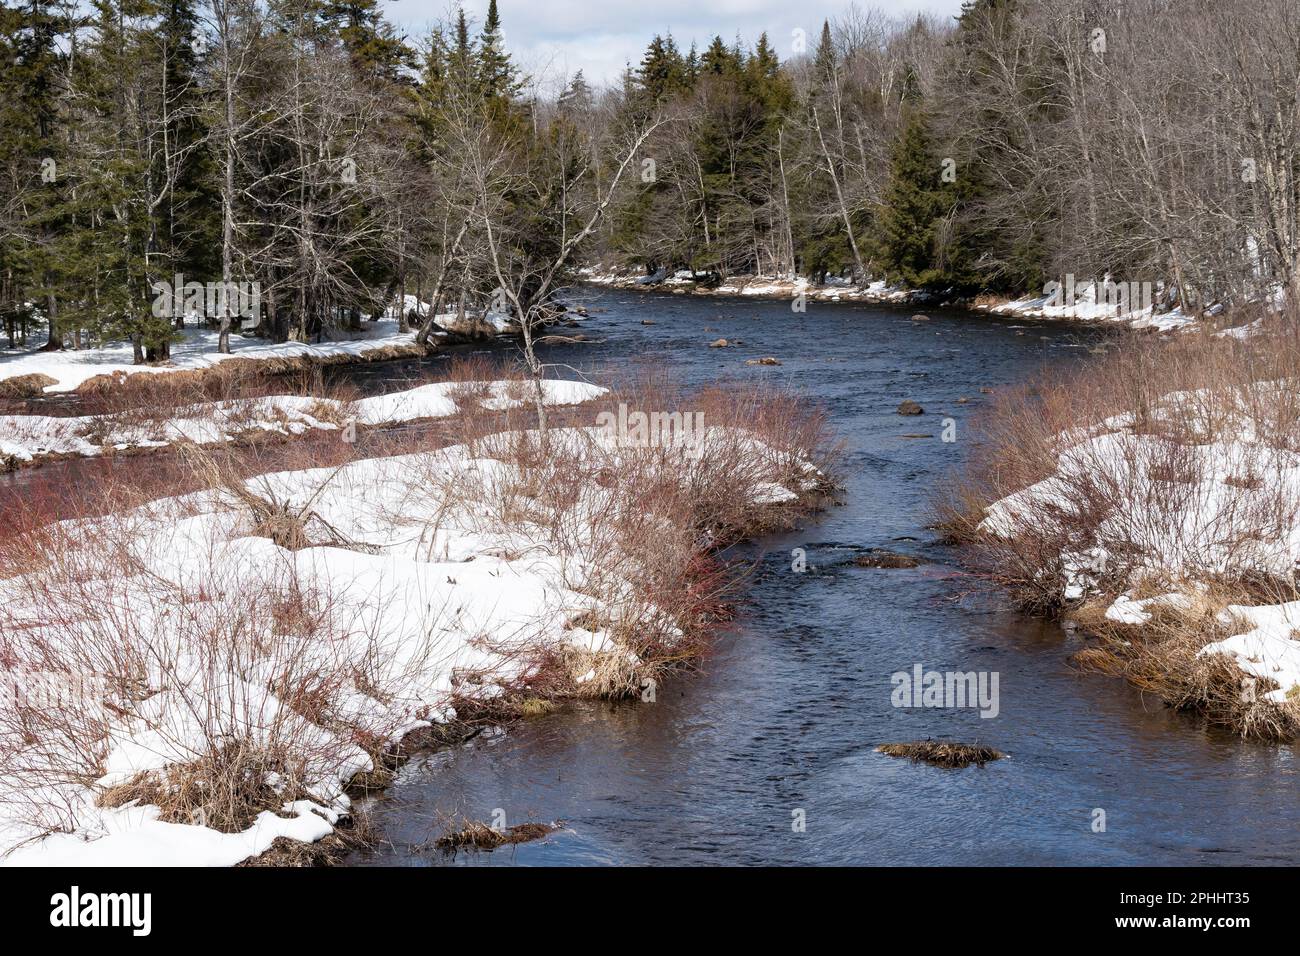 A view of the Sacandaga River in the Adirondack Mountains in late winter with snow covering the ground Stock Photo